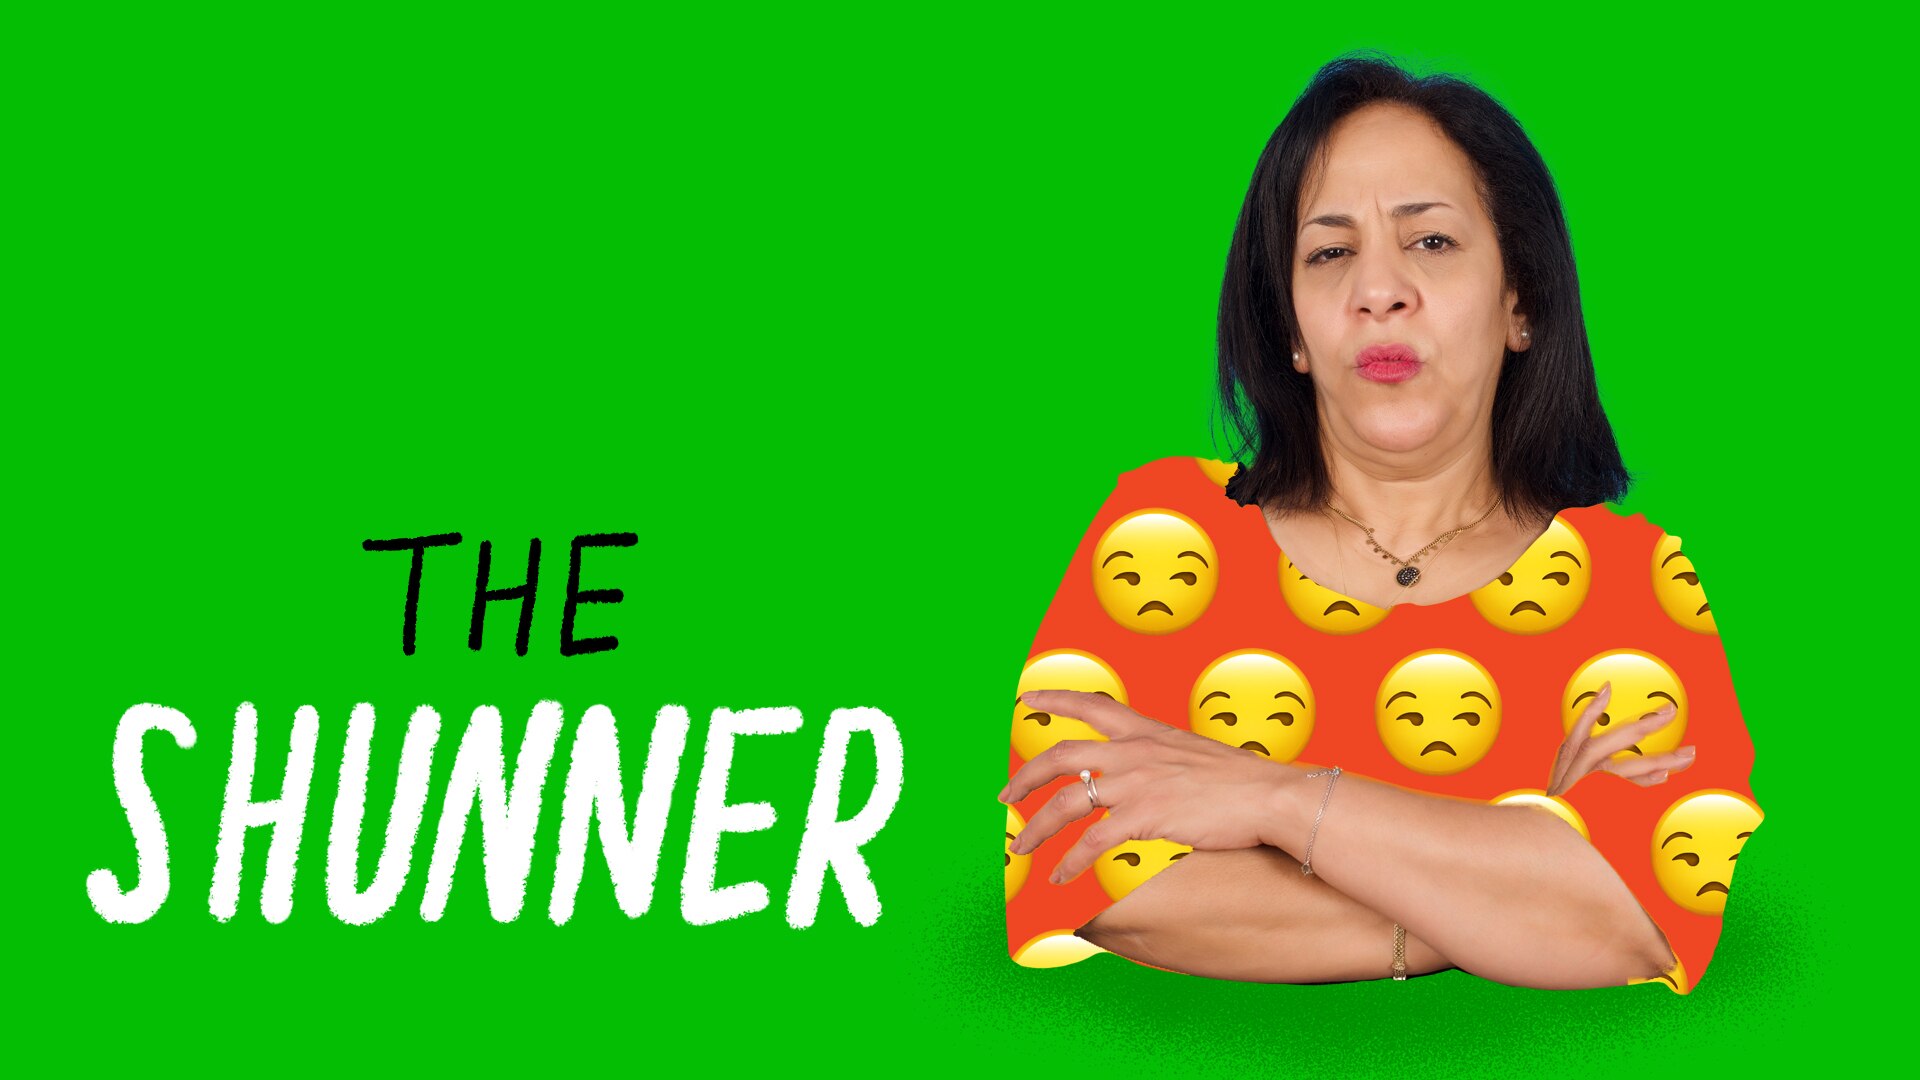 Subhead title: The Shunner. Green background, woman with arms crossed and disapproving look on her face